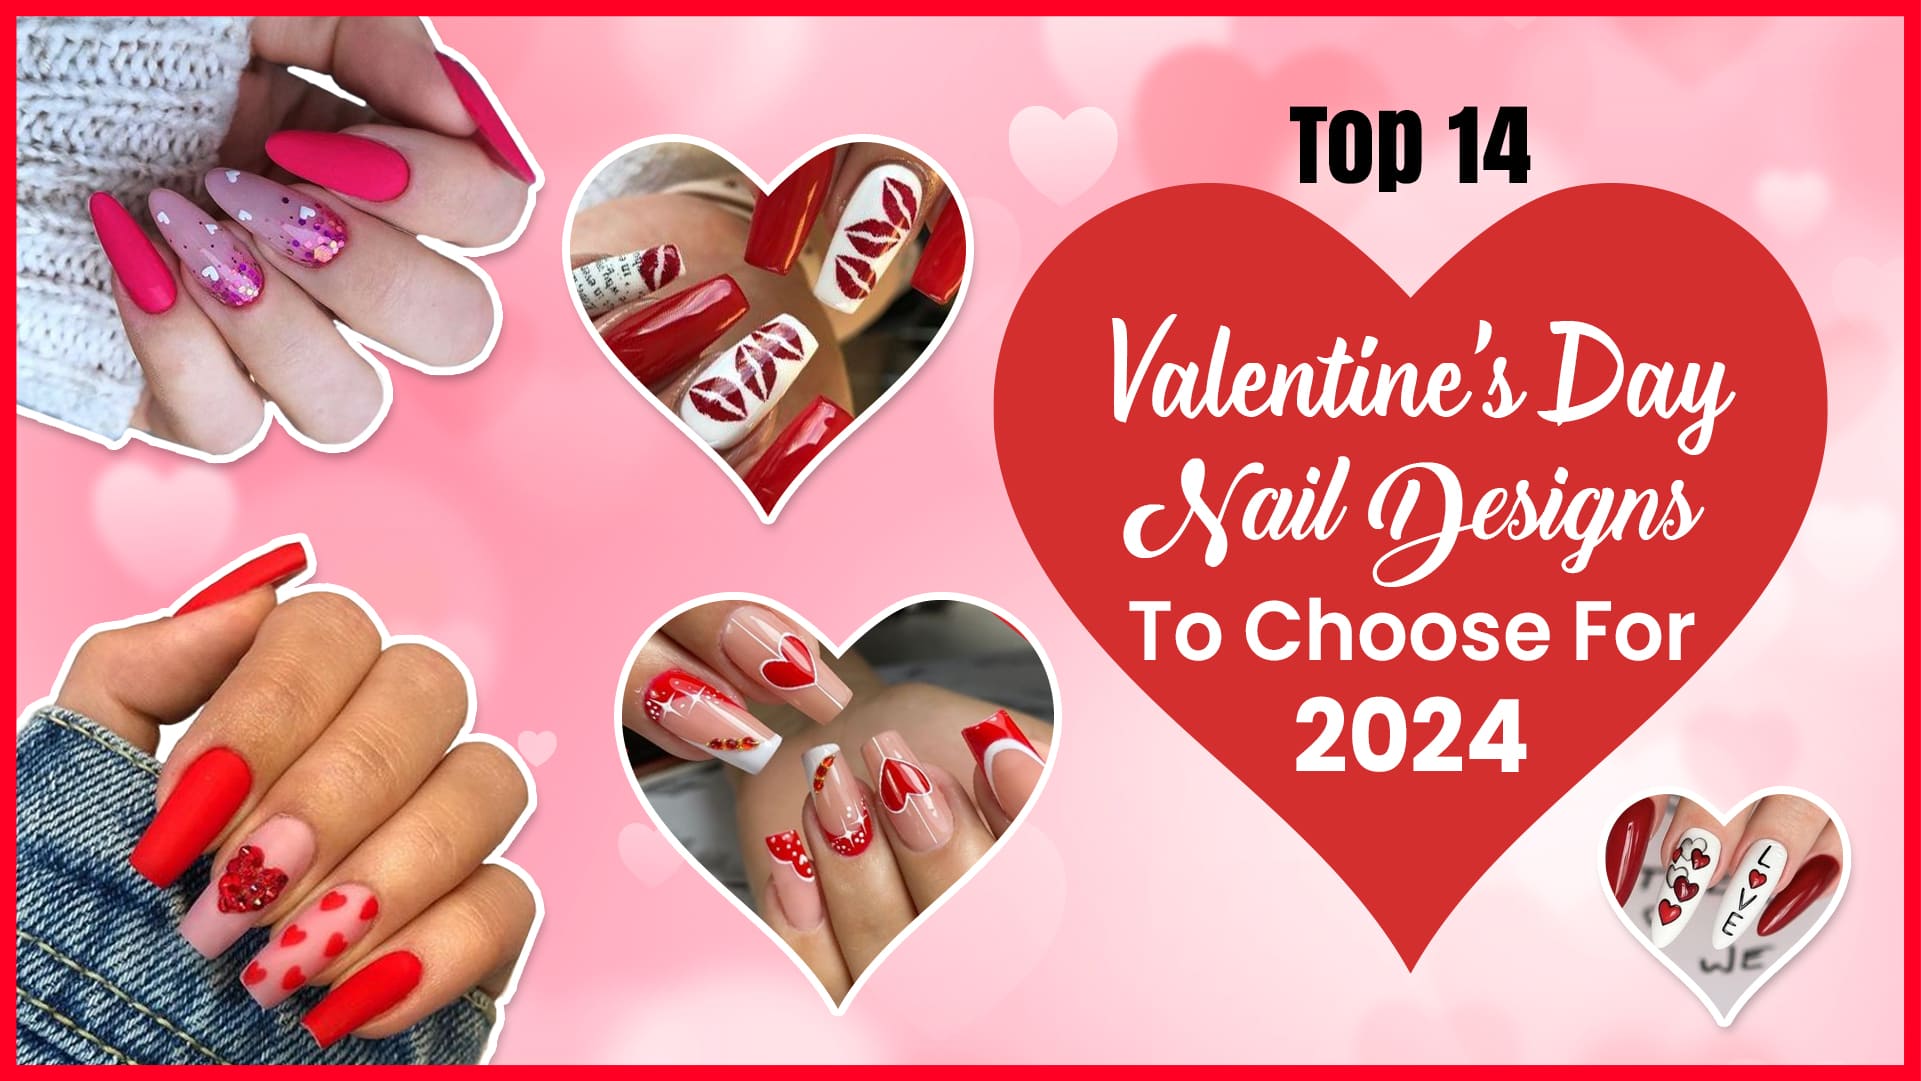 Top 14 Valentine’s Day Nail Designs To Choose For 2024!